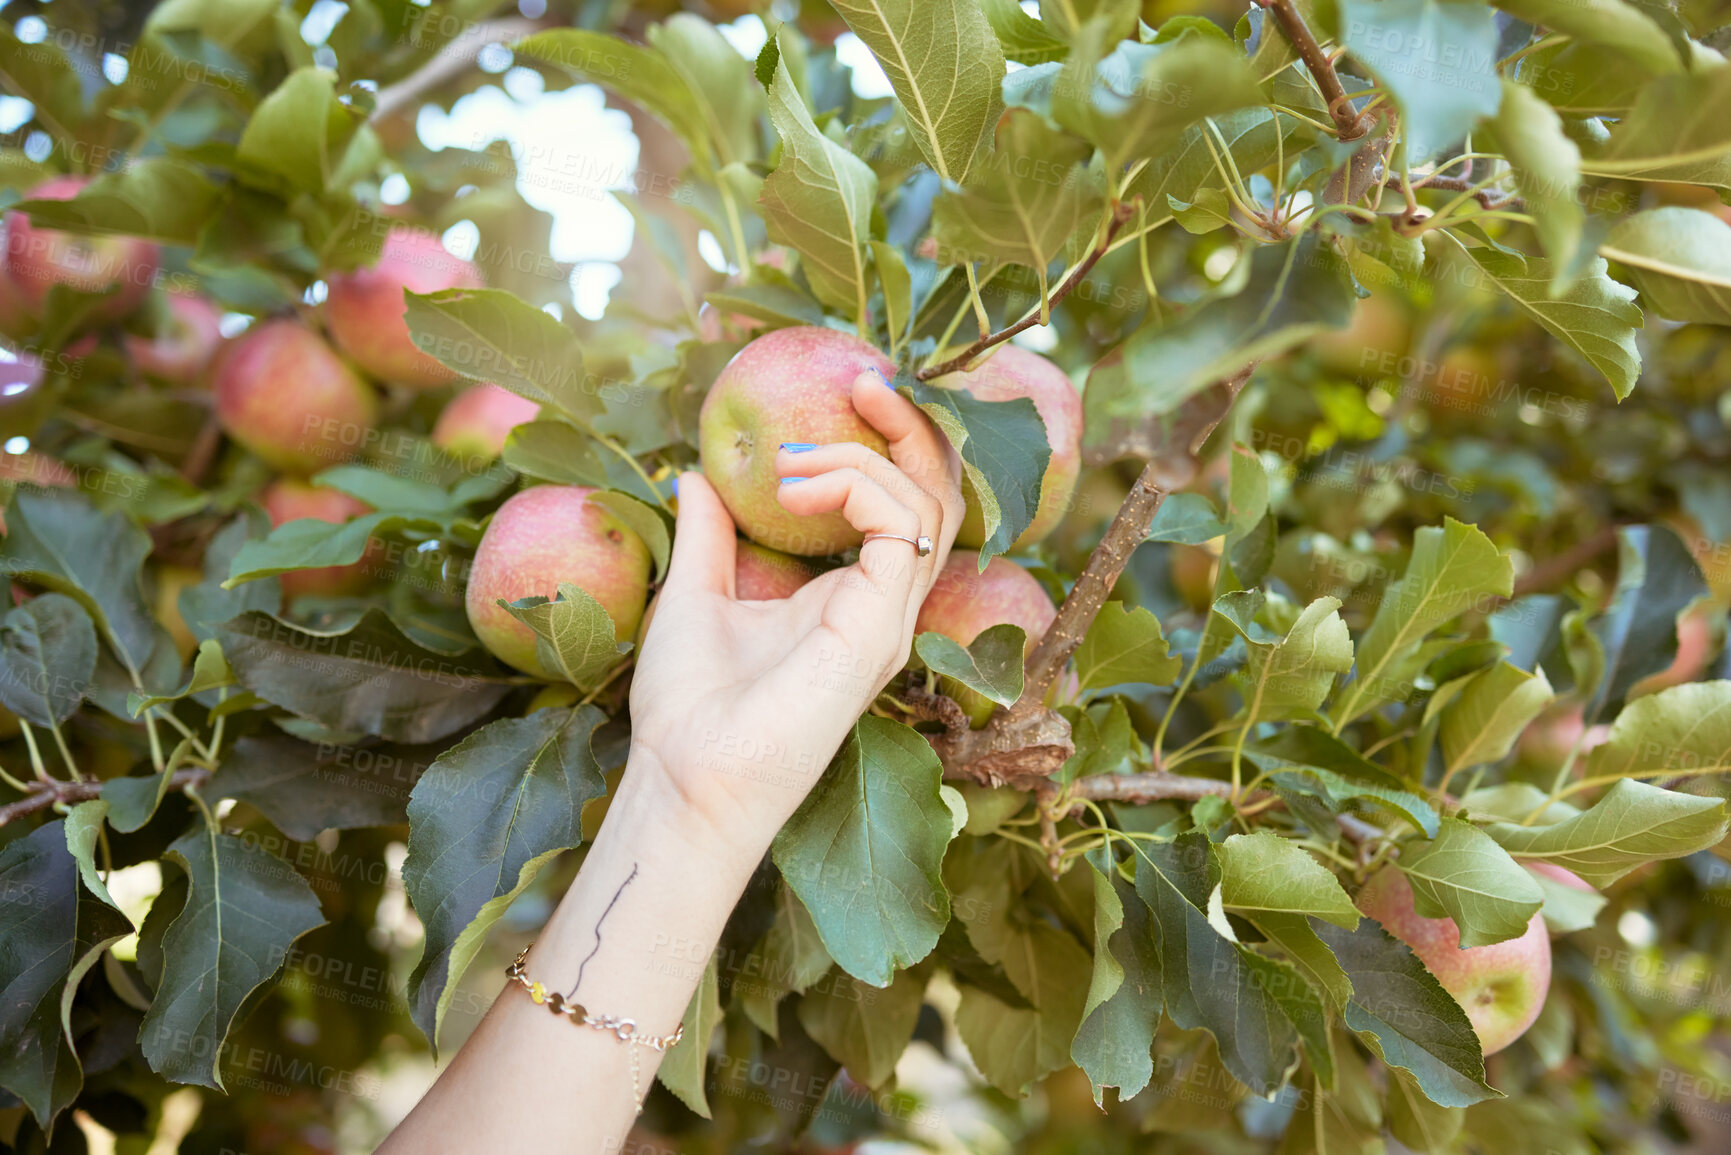 Buy stock photo Hands of farmer harvesting juicy nutritious organic fruit in season to eat. Closeup of one woman reaching to pick fresh red apples from trees on sustainable orchard farmland outside on sunny day. 